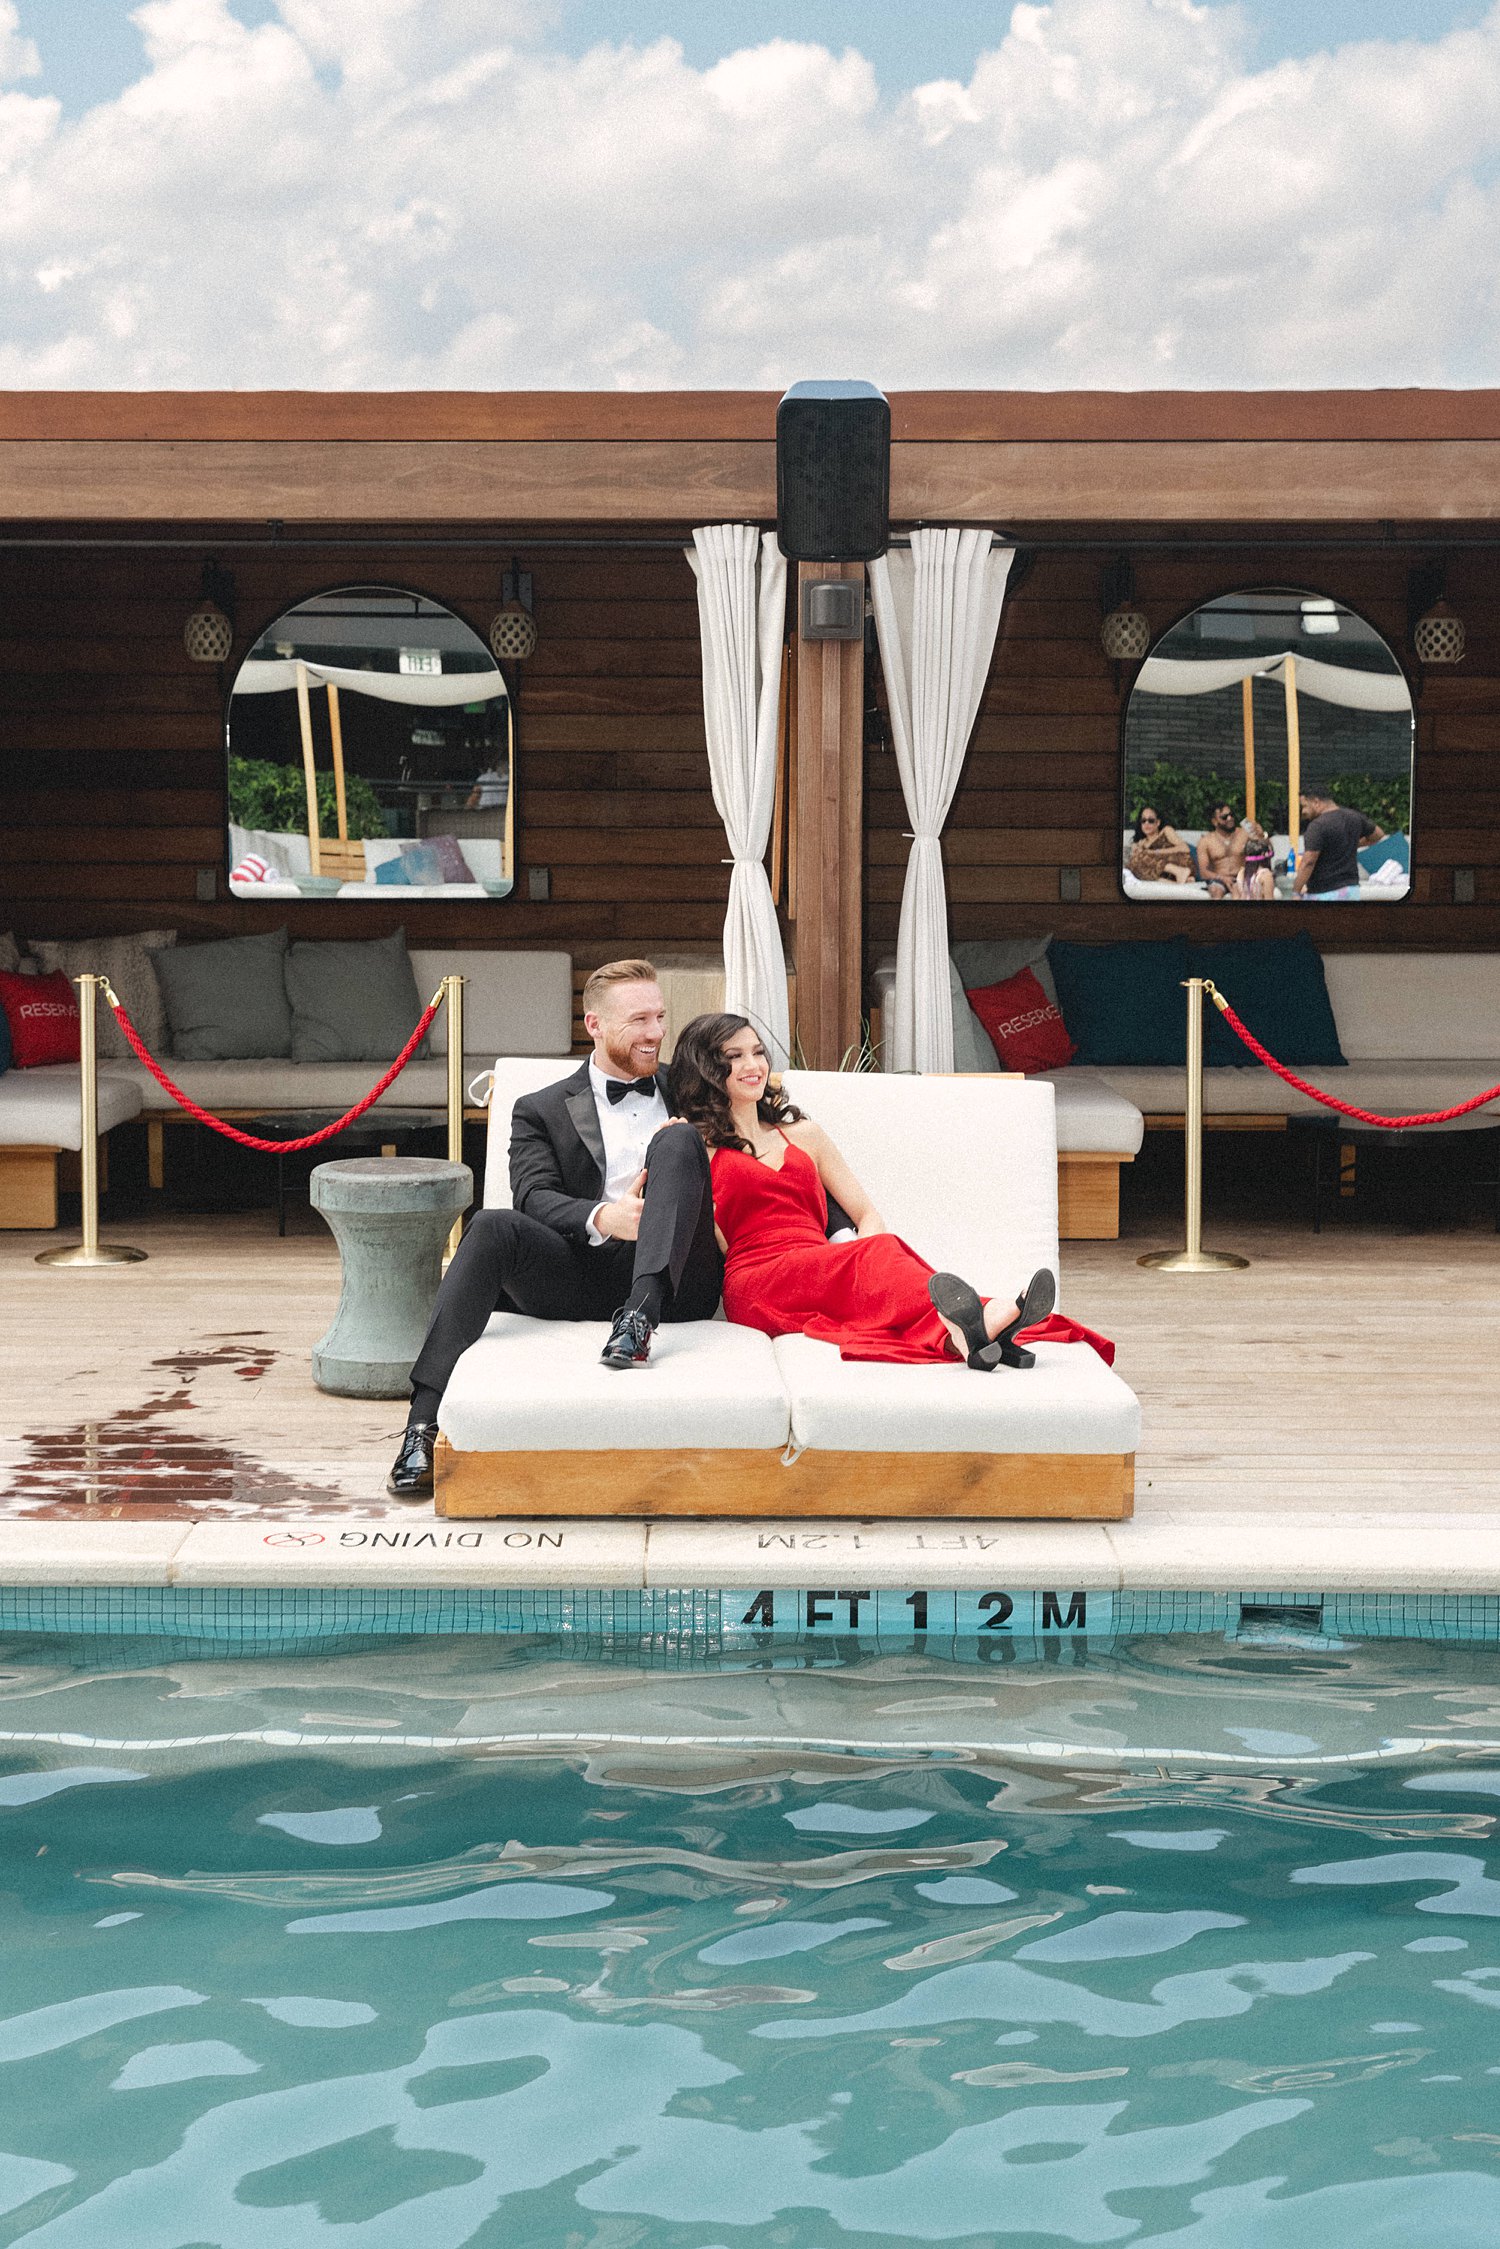 Woman in Dress sitting with man in tuxedo on white poolside deck sofa at Virgin Dallas Hotel engagement